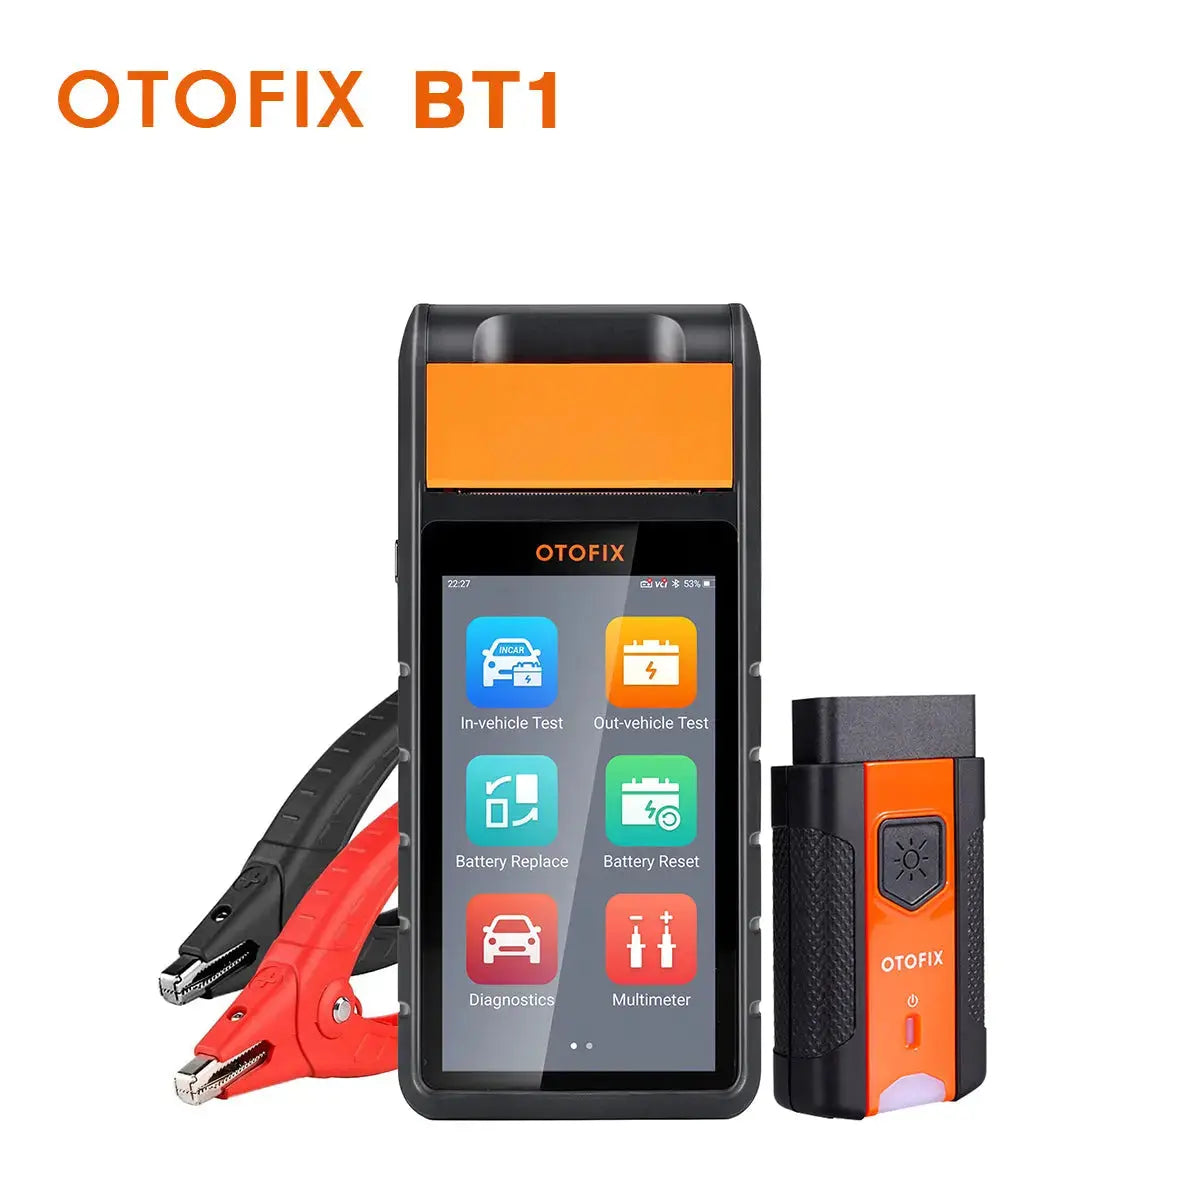 OTOFIX BT1 Professional Battery Tester, Electrical System Analyser - FairTools